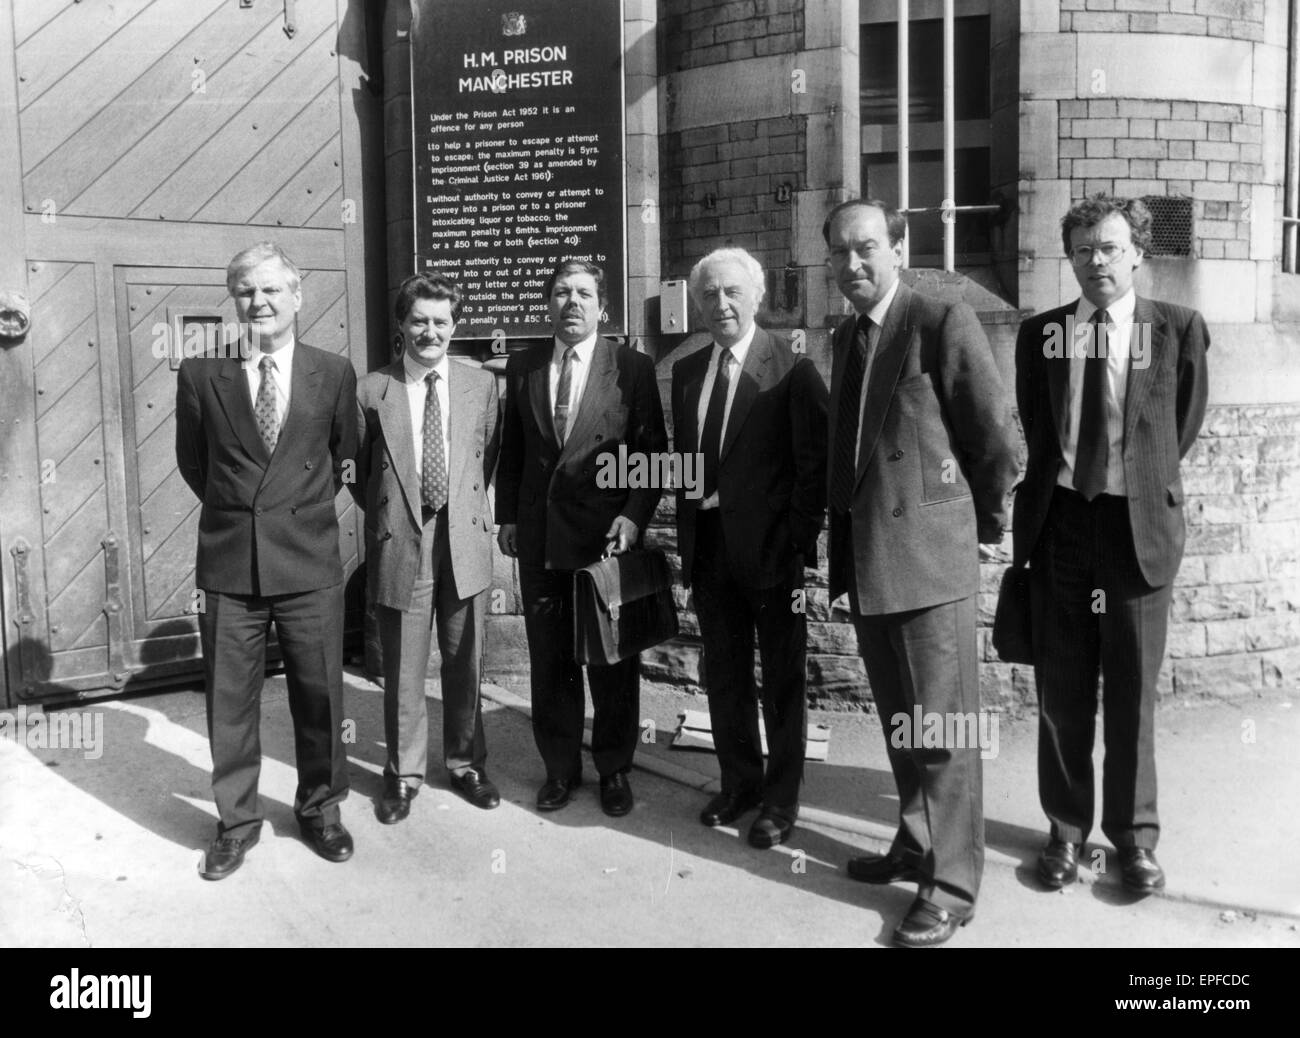 Strangeways Prison Riot 29th April 1990. Members of Home Affairs committee along with local MPs, visit Strangeways. Left to Right, Joe Ashton, Tony Lloyd, Alan Meale, Bob Litherland, John Greenway and Paul Silk.  A 25-day prison riot and rooftop protest a Stock Photo